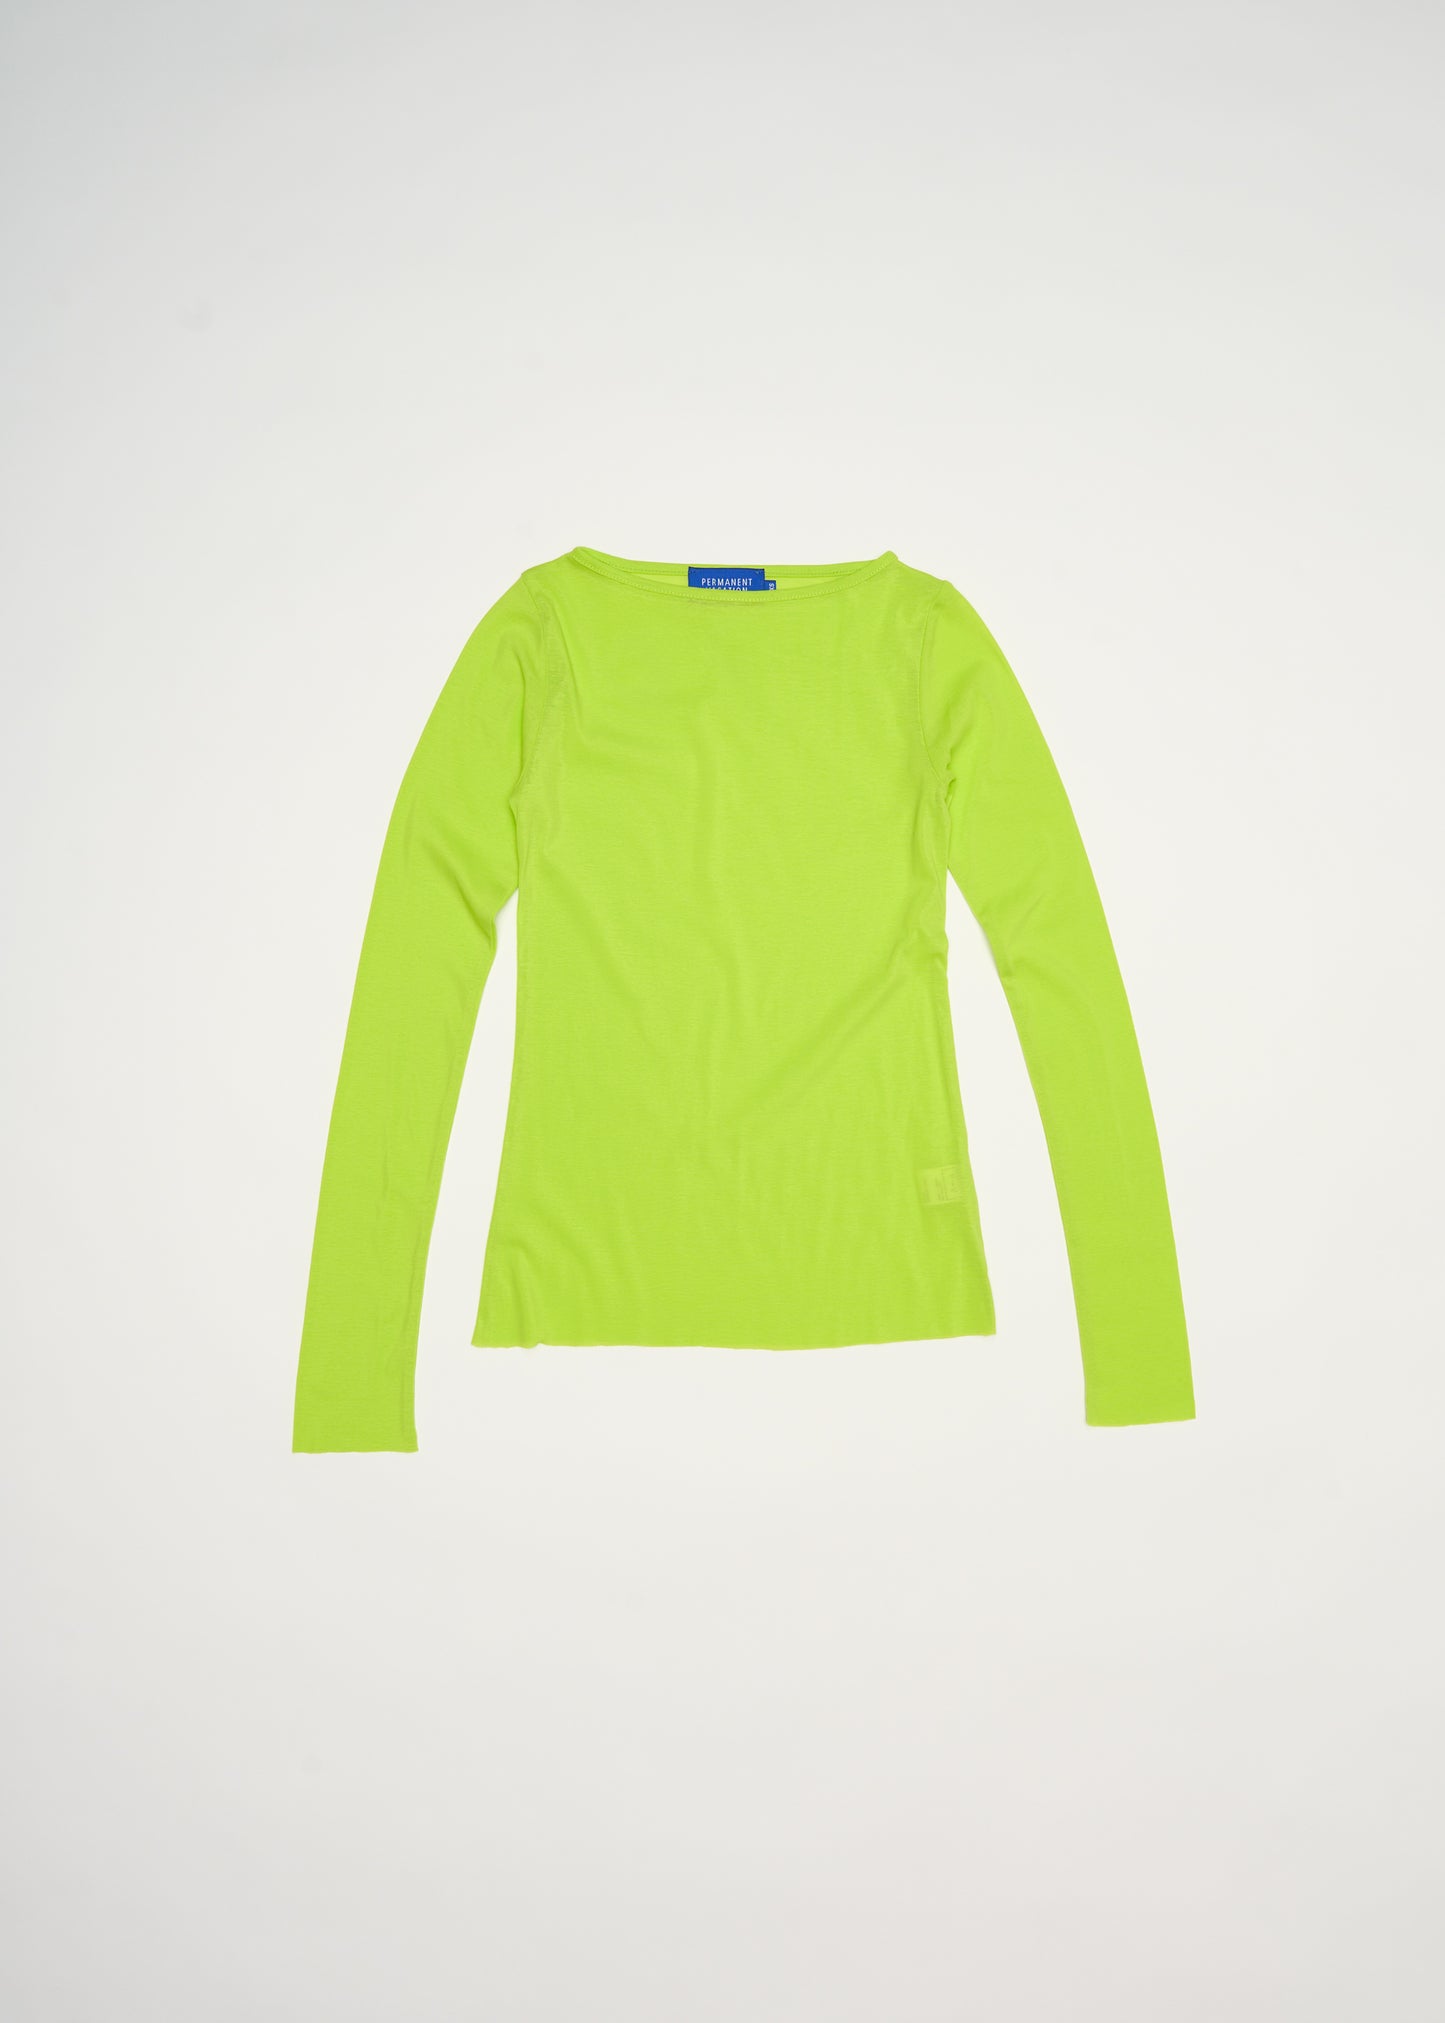 Connection Top in Acid Green